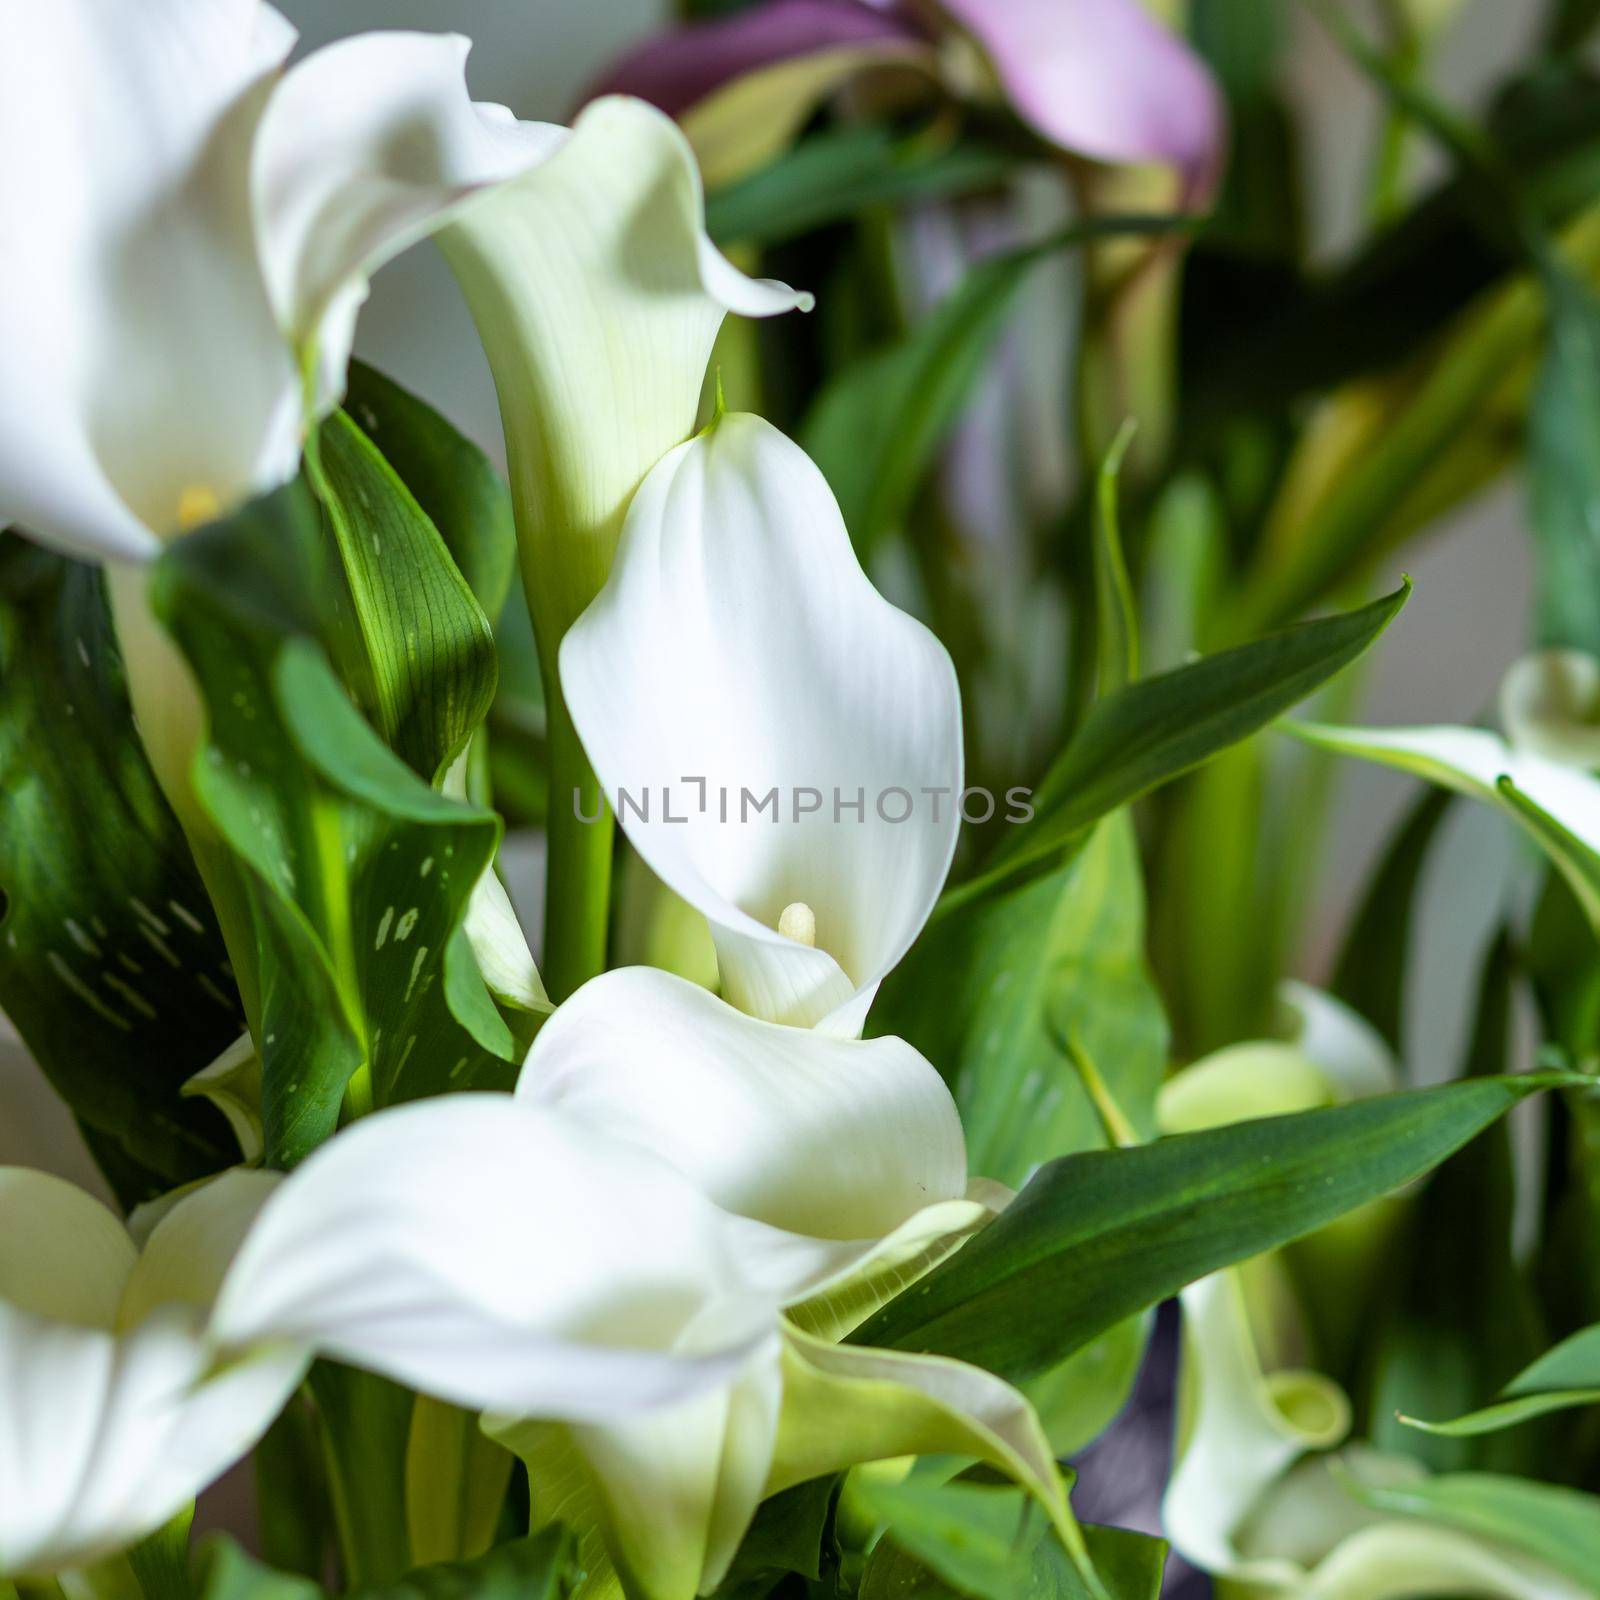 Arum lily flower plant close up